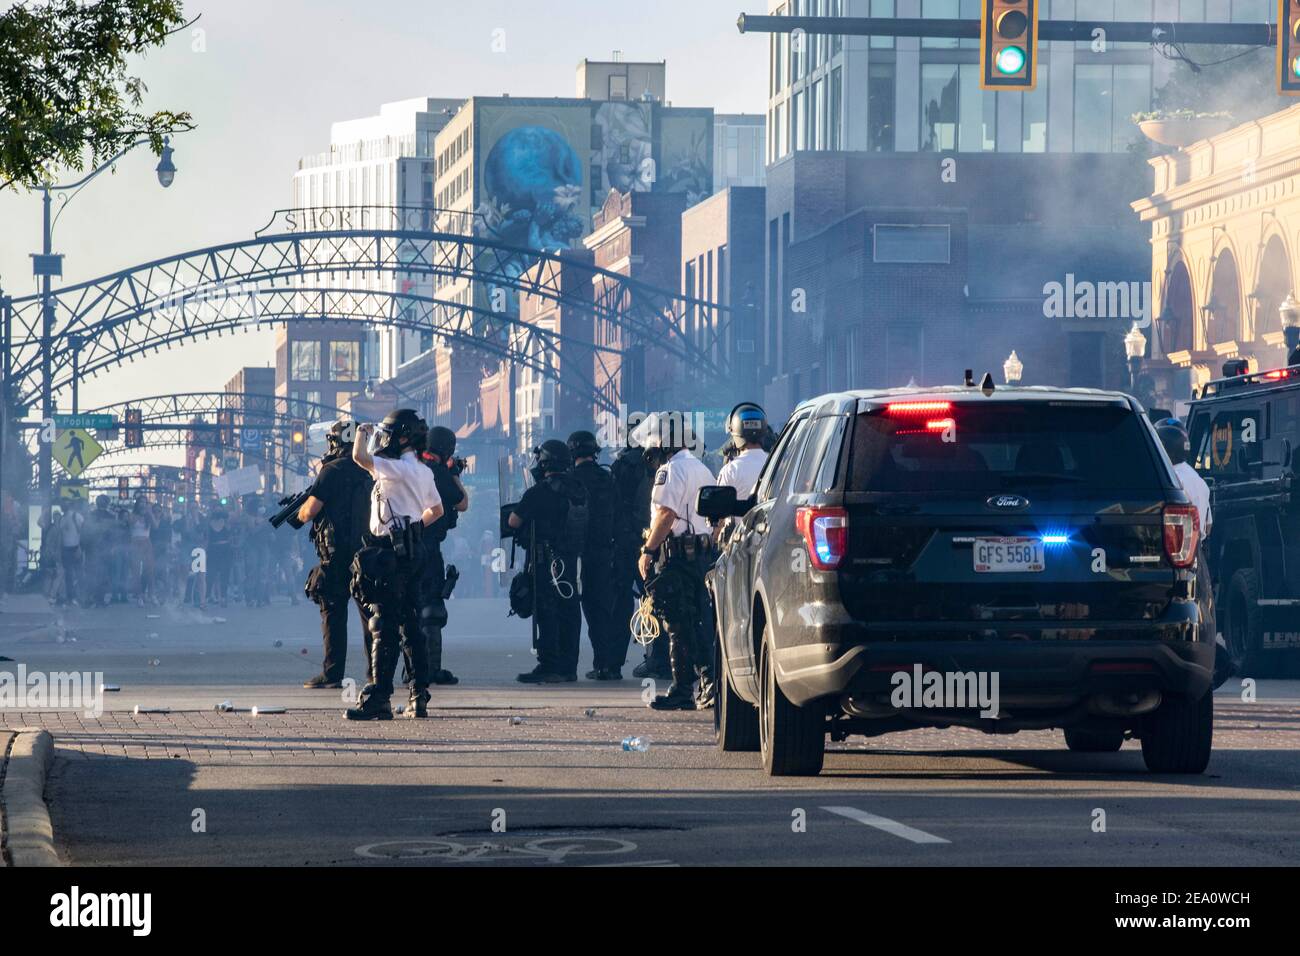 Columbus Police and SWAT officers fire tear gas canisters to disperse protesters during the demonstration.Five days after the death of George Floyd at the hands of Minneapolis Police Officer Derek Chauvin Columbus, Ohio declared a state of emergency and imposed a curfew from 10pm to 6am to deal with the large scale protests happening in the city. The Ohio National Guard were called in at 3pm to help quell the protests and stop any rioting. National Guard and Riot officers pushed protesters north on High St. tear gassing and arresting protesters. Stock Photo